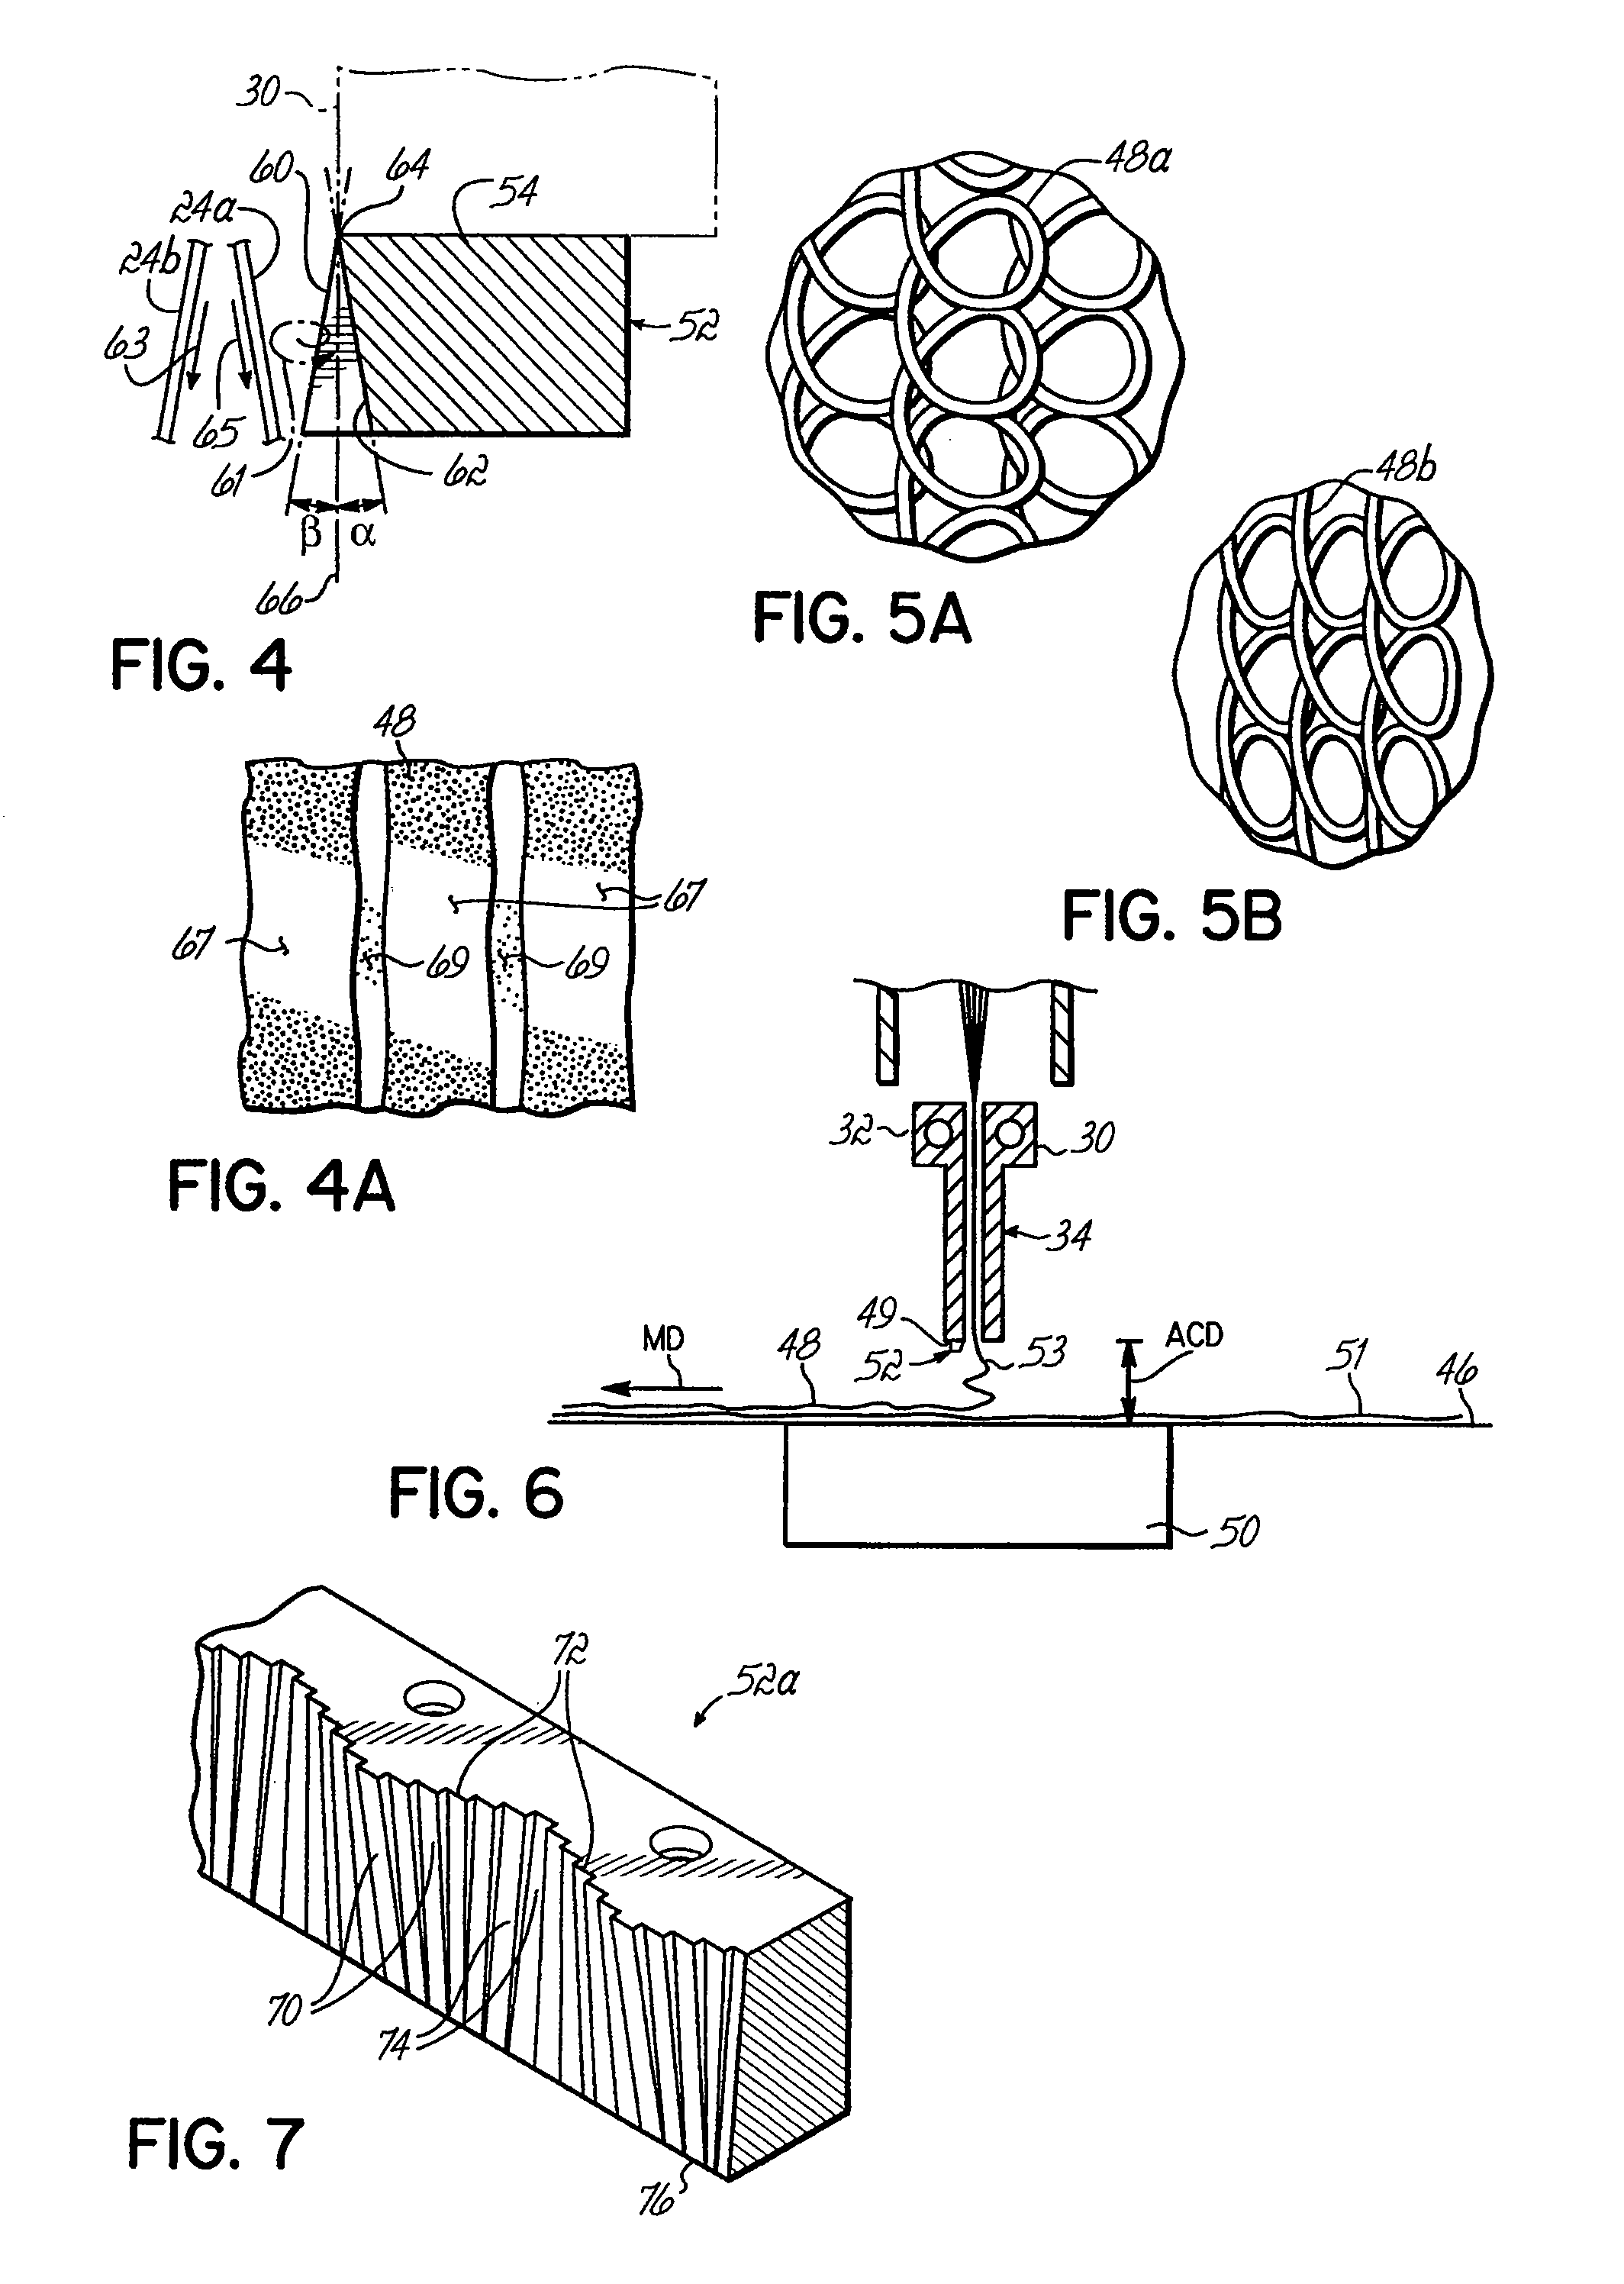 Stabilized filament drawing device for a meltspinning apparatus